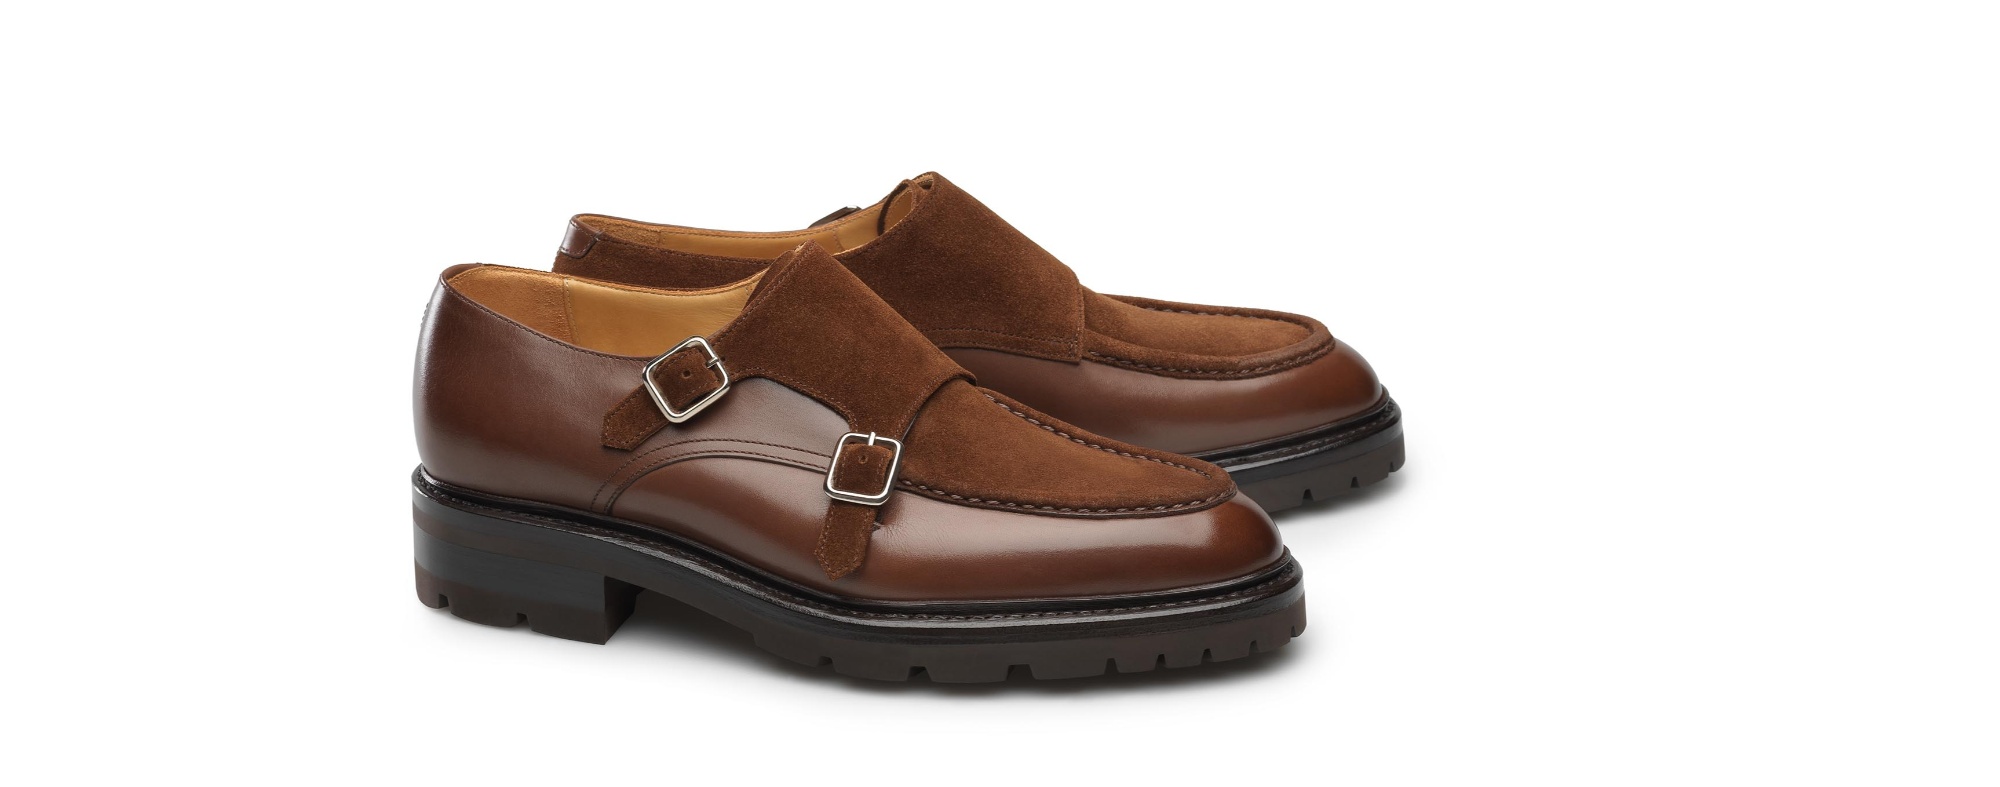 GMTO Shoes for Men 